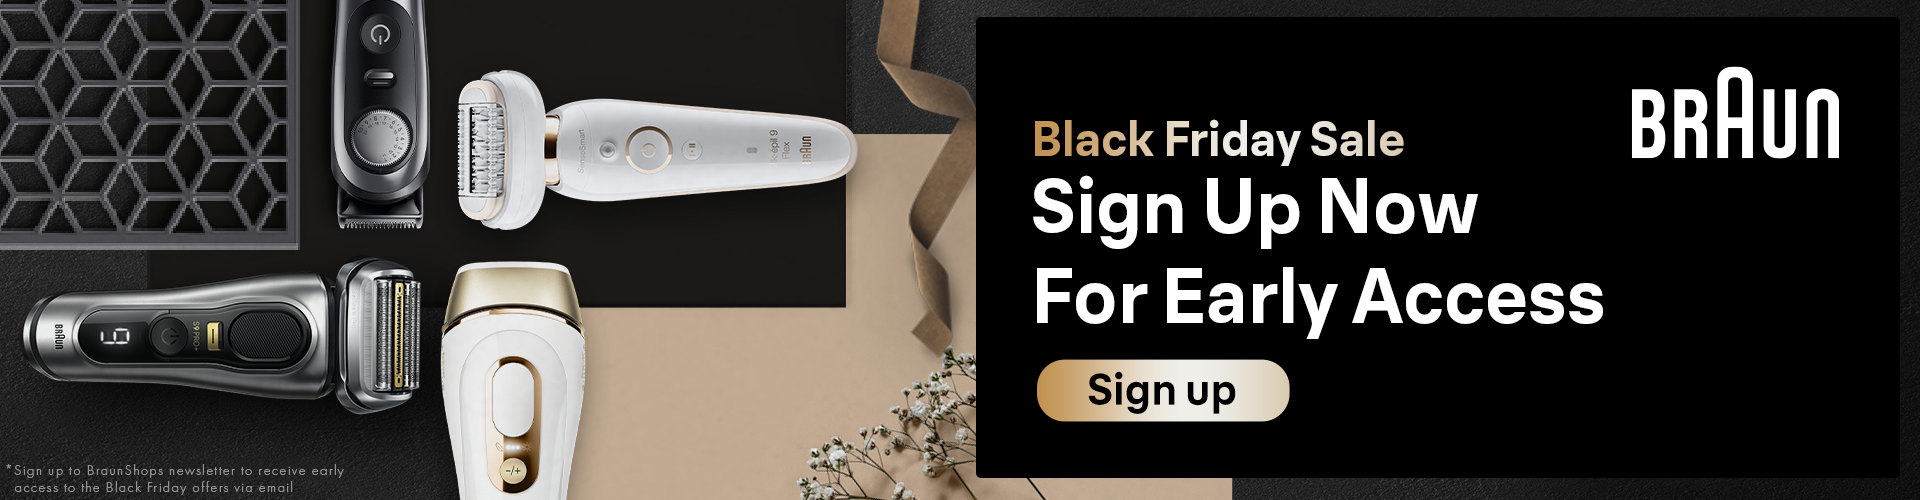 Black Friday Sale | Sign Up Now For Early Access